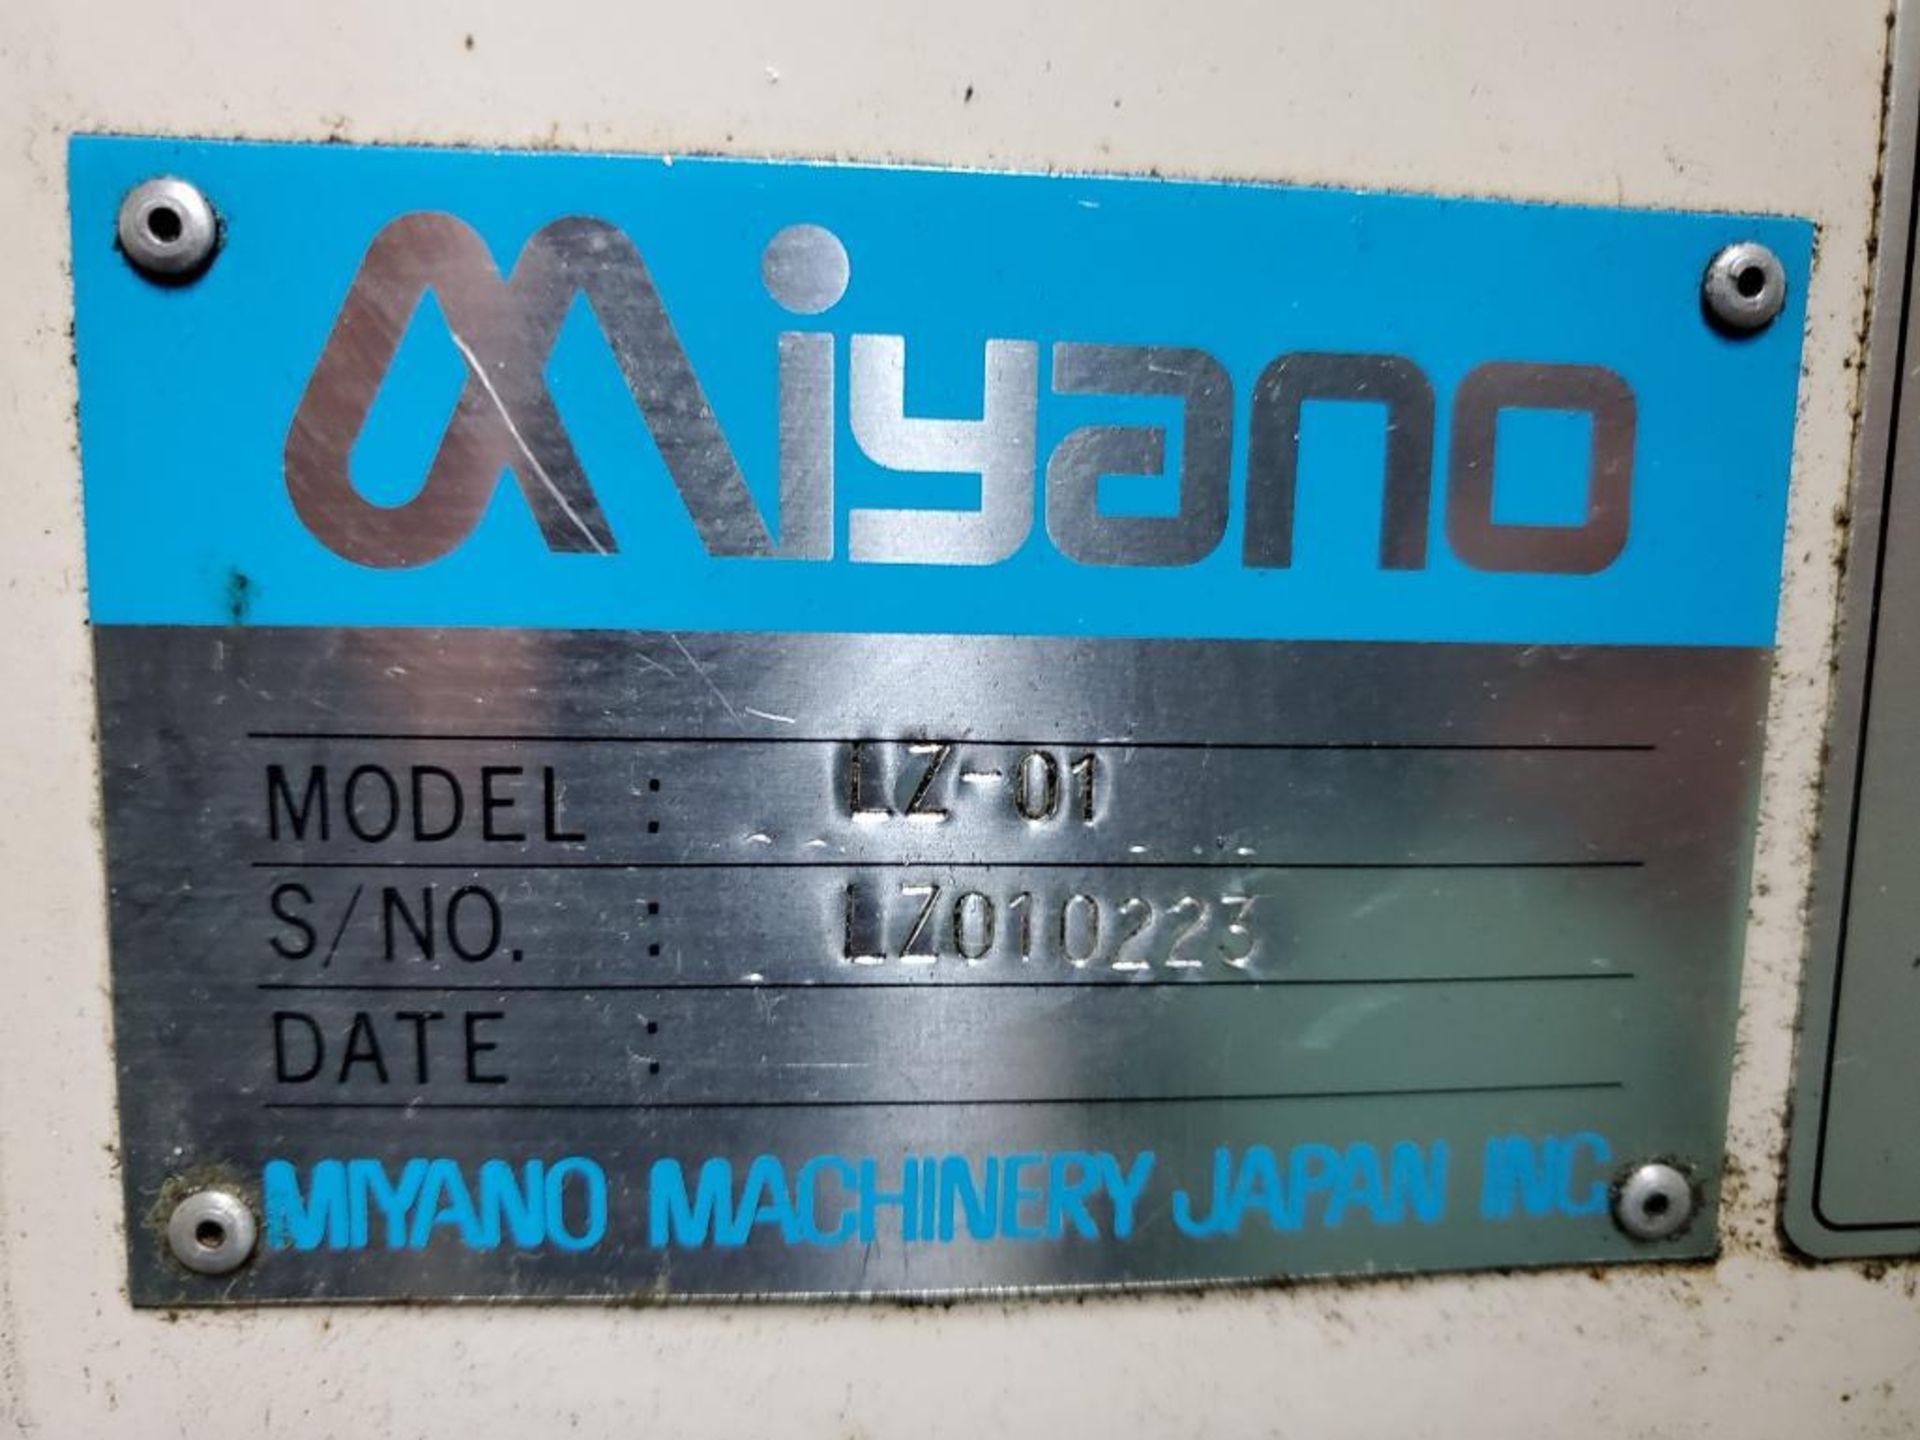 Miyano LZ-01 2-Axis Turning Center w/Auto Load/unload System, S/N 12647, New 2001 - Image 10 of 14